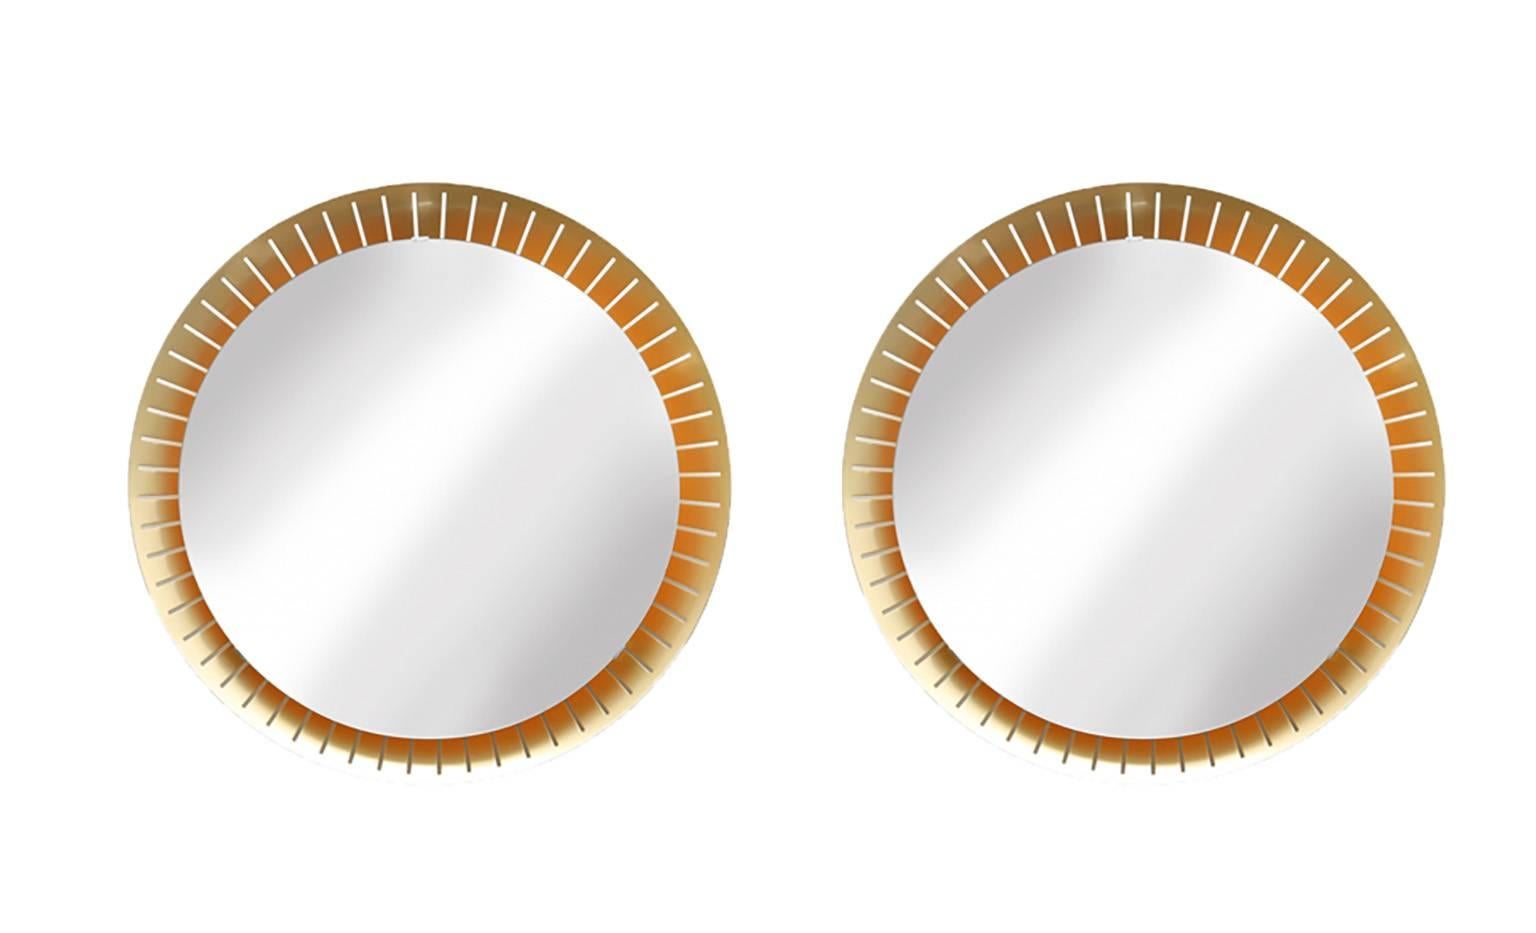 Mid-Century back-lit mirrors with perforated brass-plated frame.
In back of the mirror a round TL tube source is hidden.

Attributed to Mathieu Matégot for Artimeta.

Ø 52 cm D 8 cm.